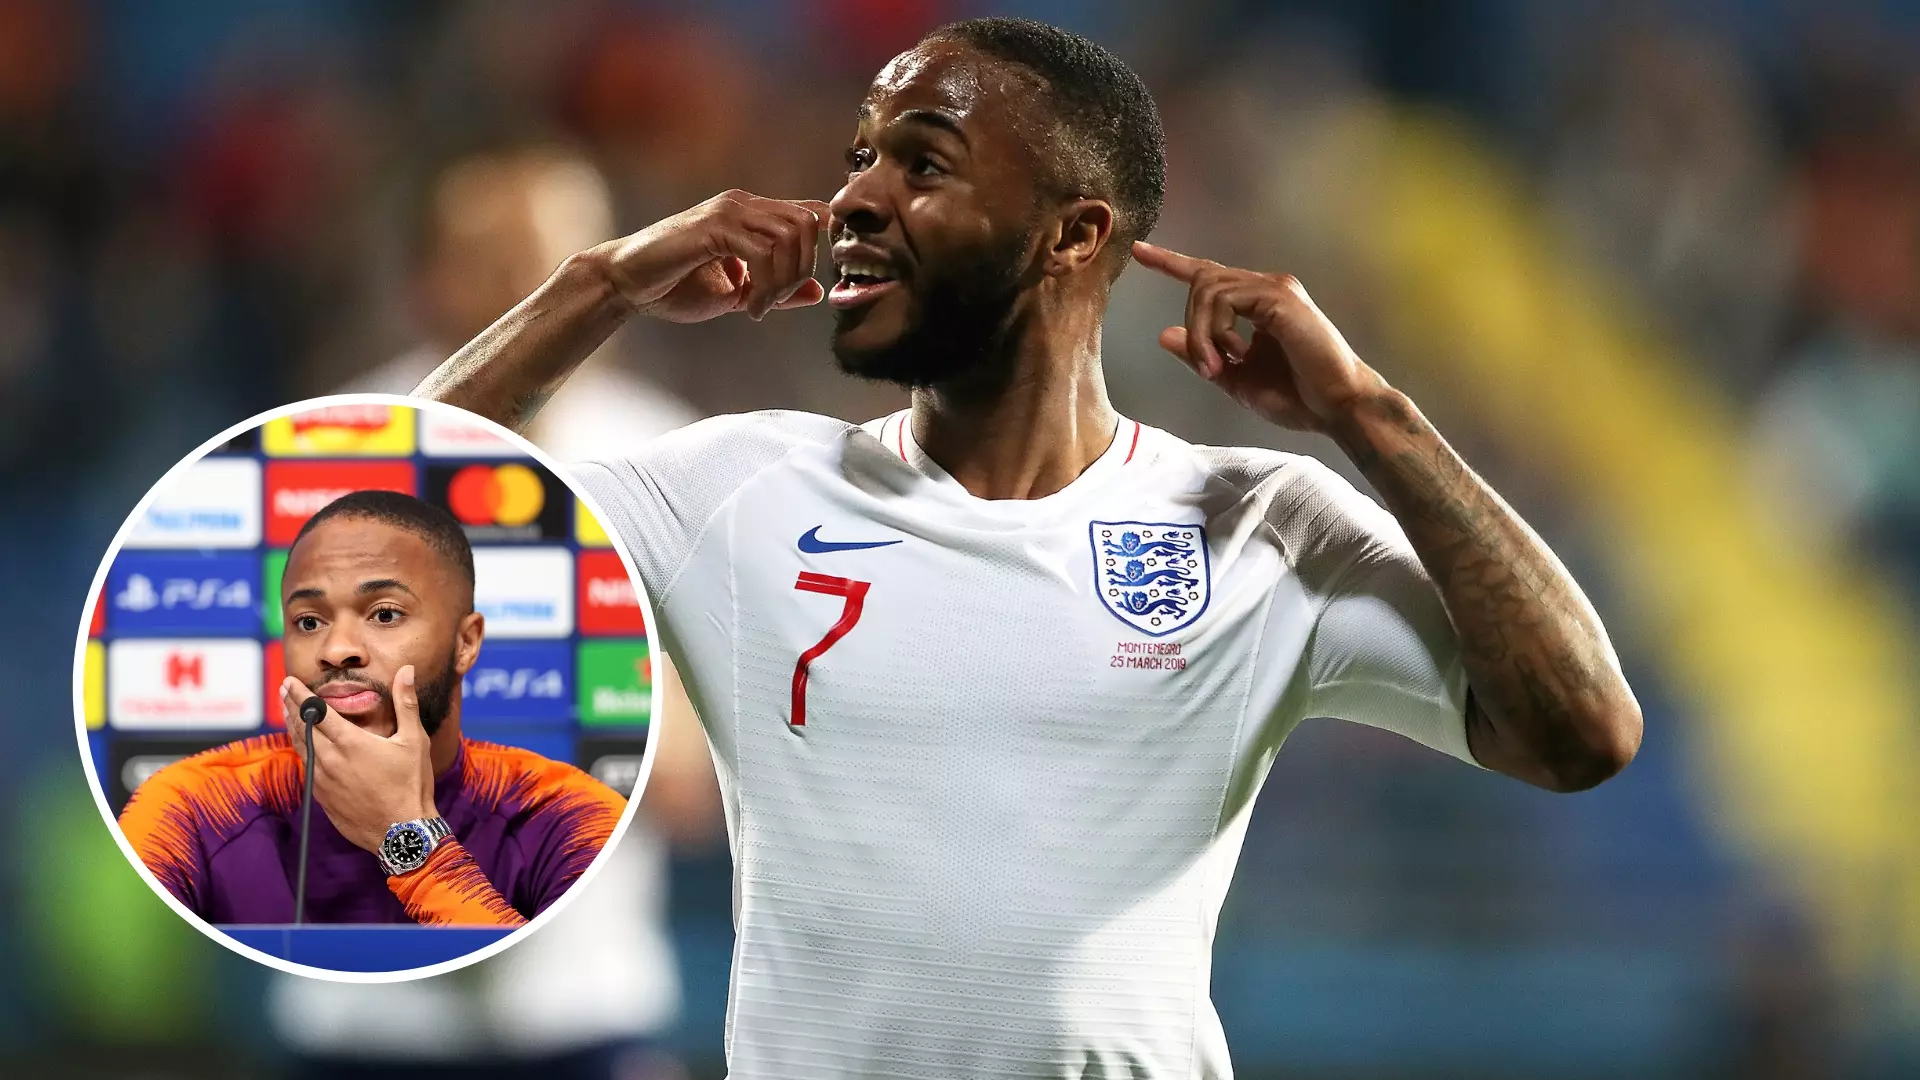 Raheem Sterling Wants Clubs To Receive 'Automatic Nine-Point Deduction' For Racist Abuse